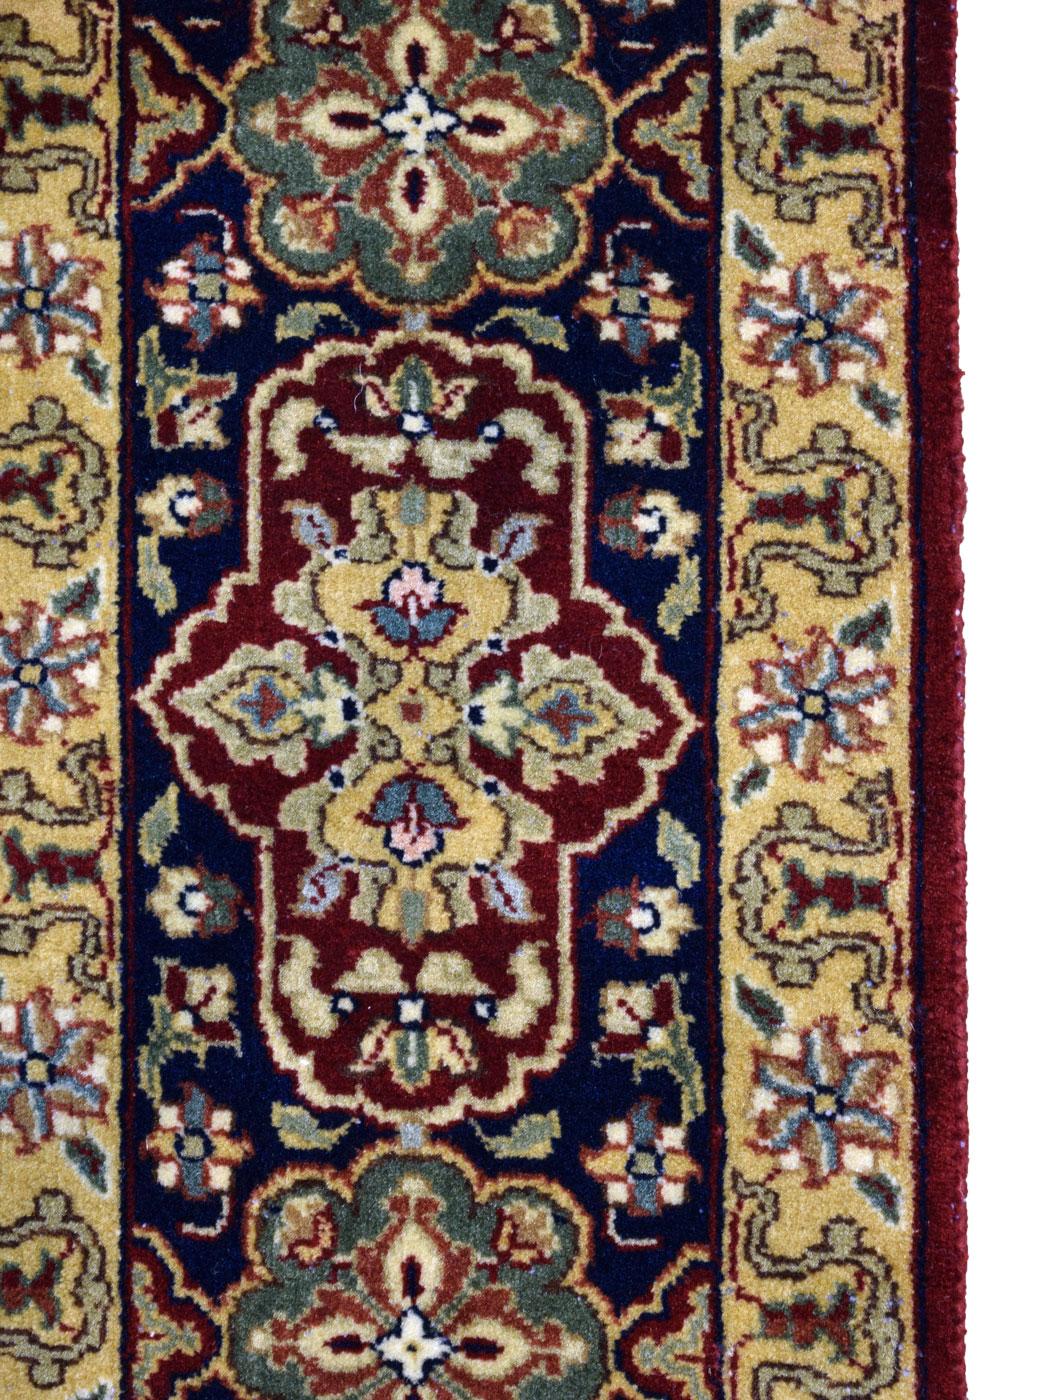 Fine Hand Knotted Tabriz Carpet in Gold Maroon and Cream Wool, 5' x 7' For Sale 4